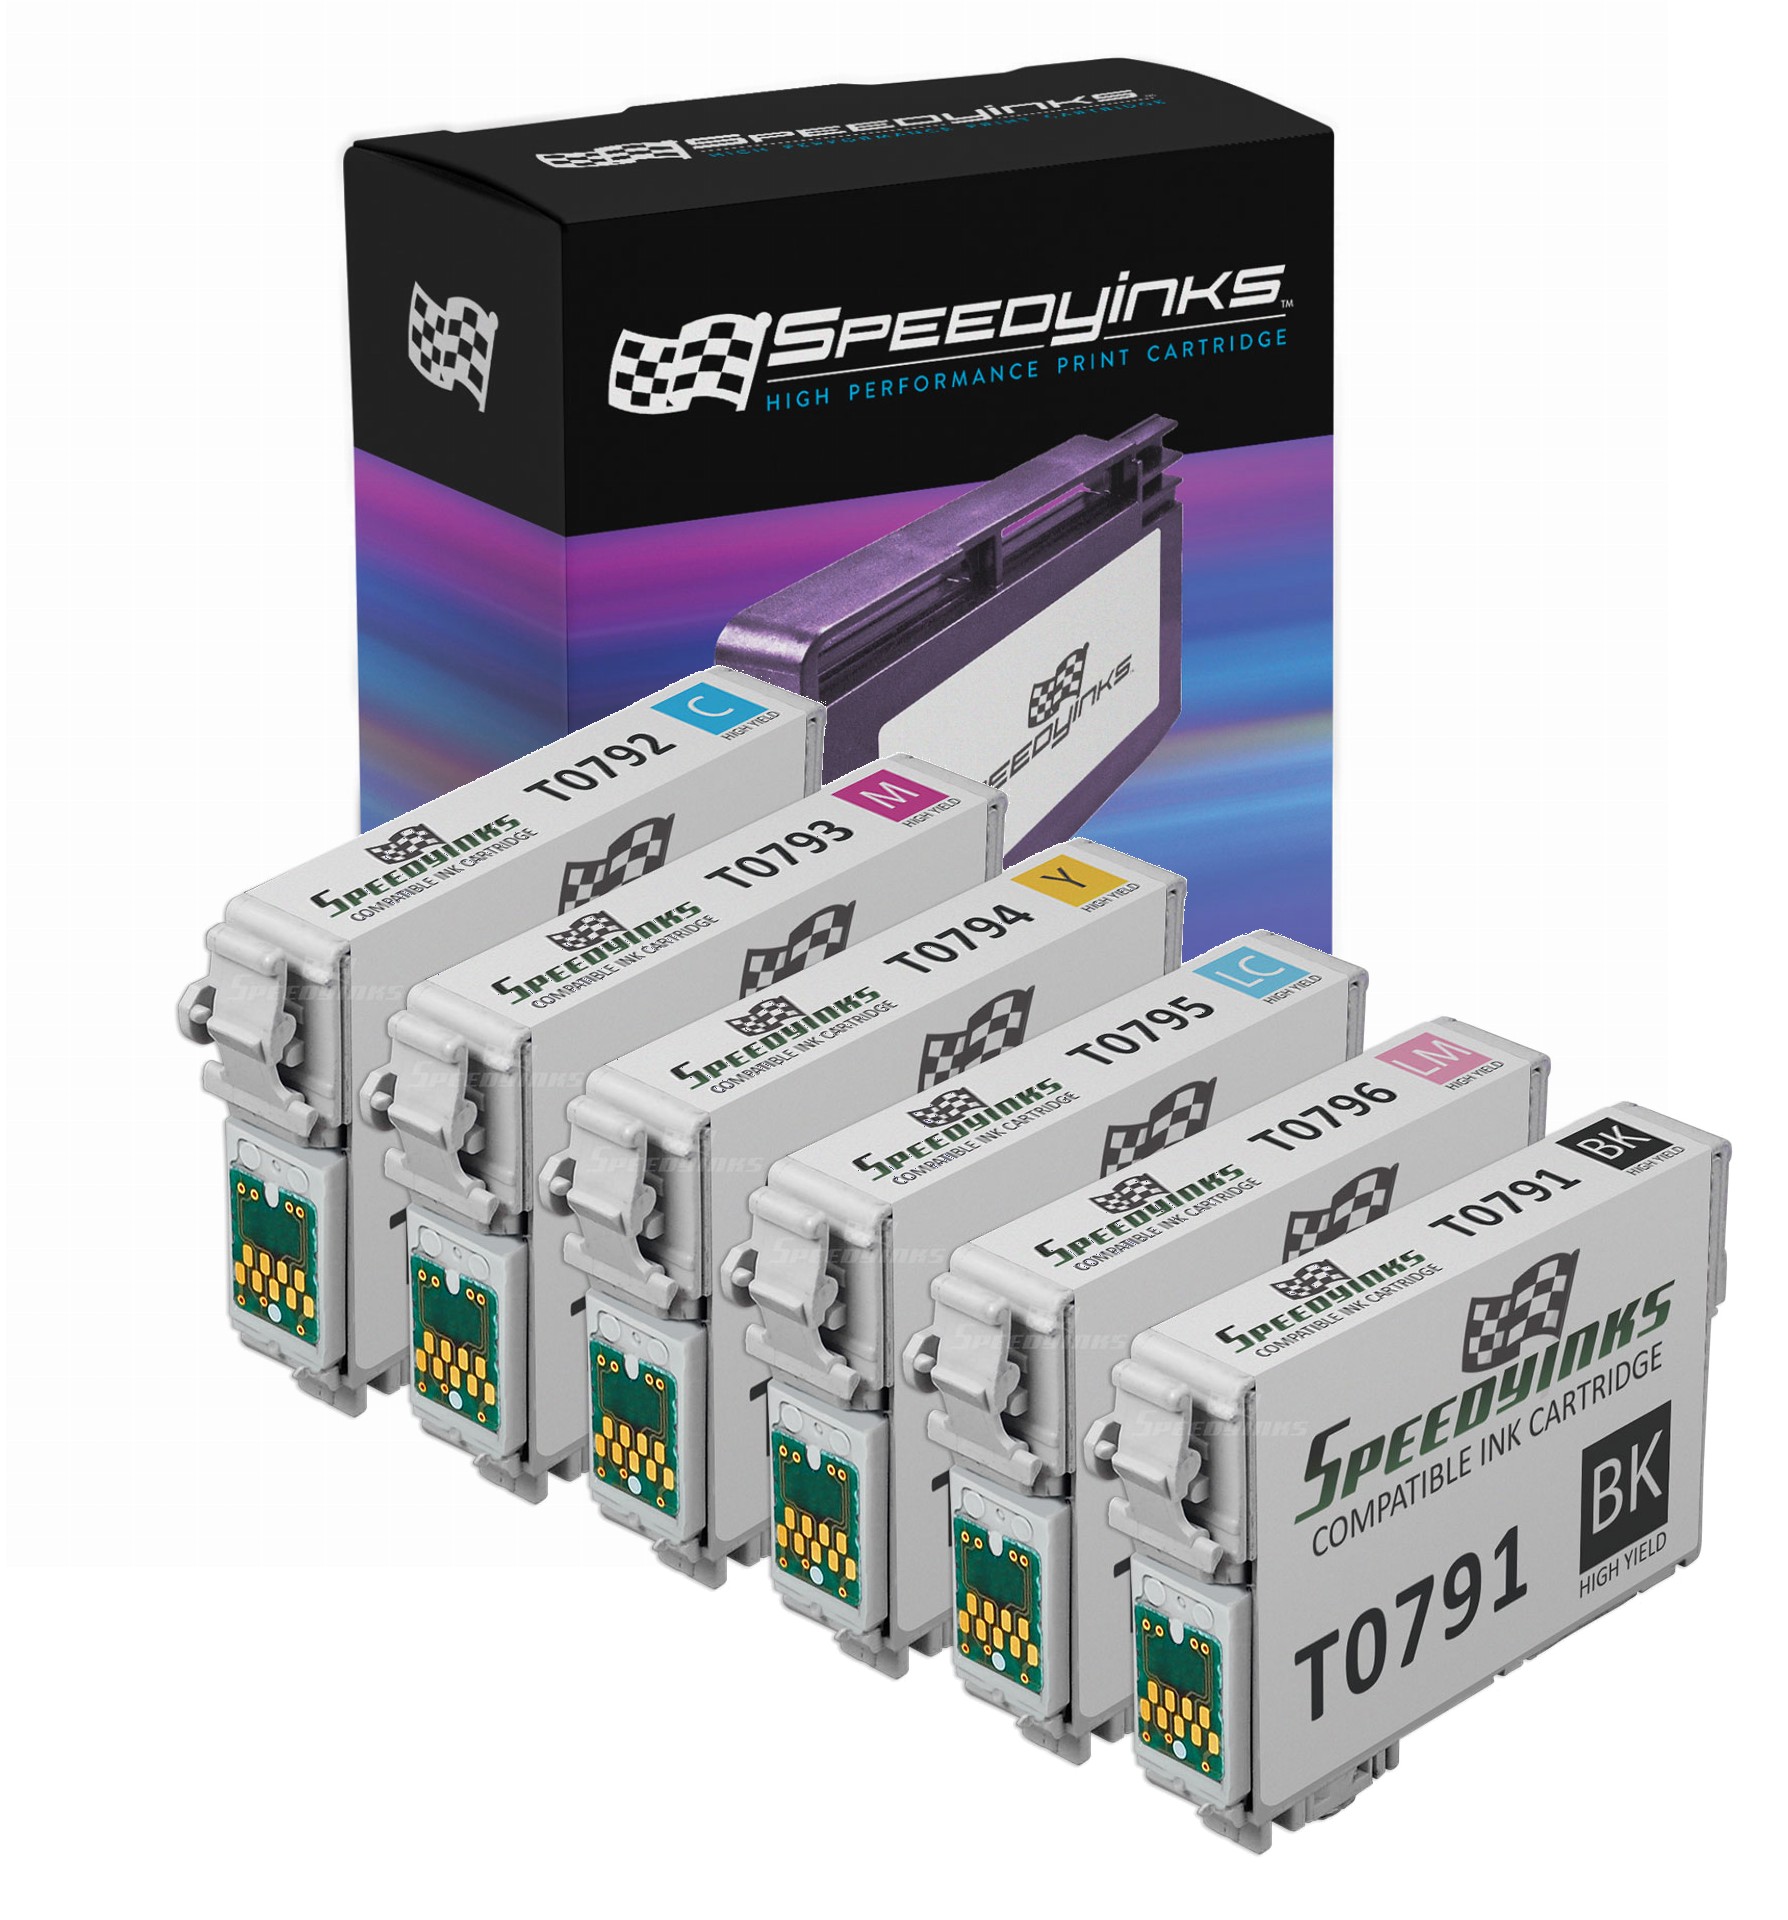 Speedy Remanufactured Cartridge Replacement for Epson 79 High Yield (1 Black, 1 Cyan, 1 Magenta, 1 Yellow, 1 Light Cyan, 1 Light Magenta, 6-Pack) - image 1 of 1